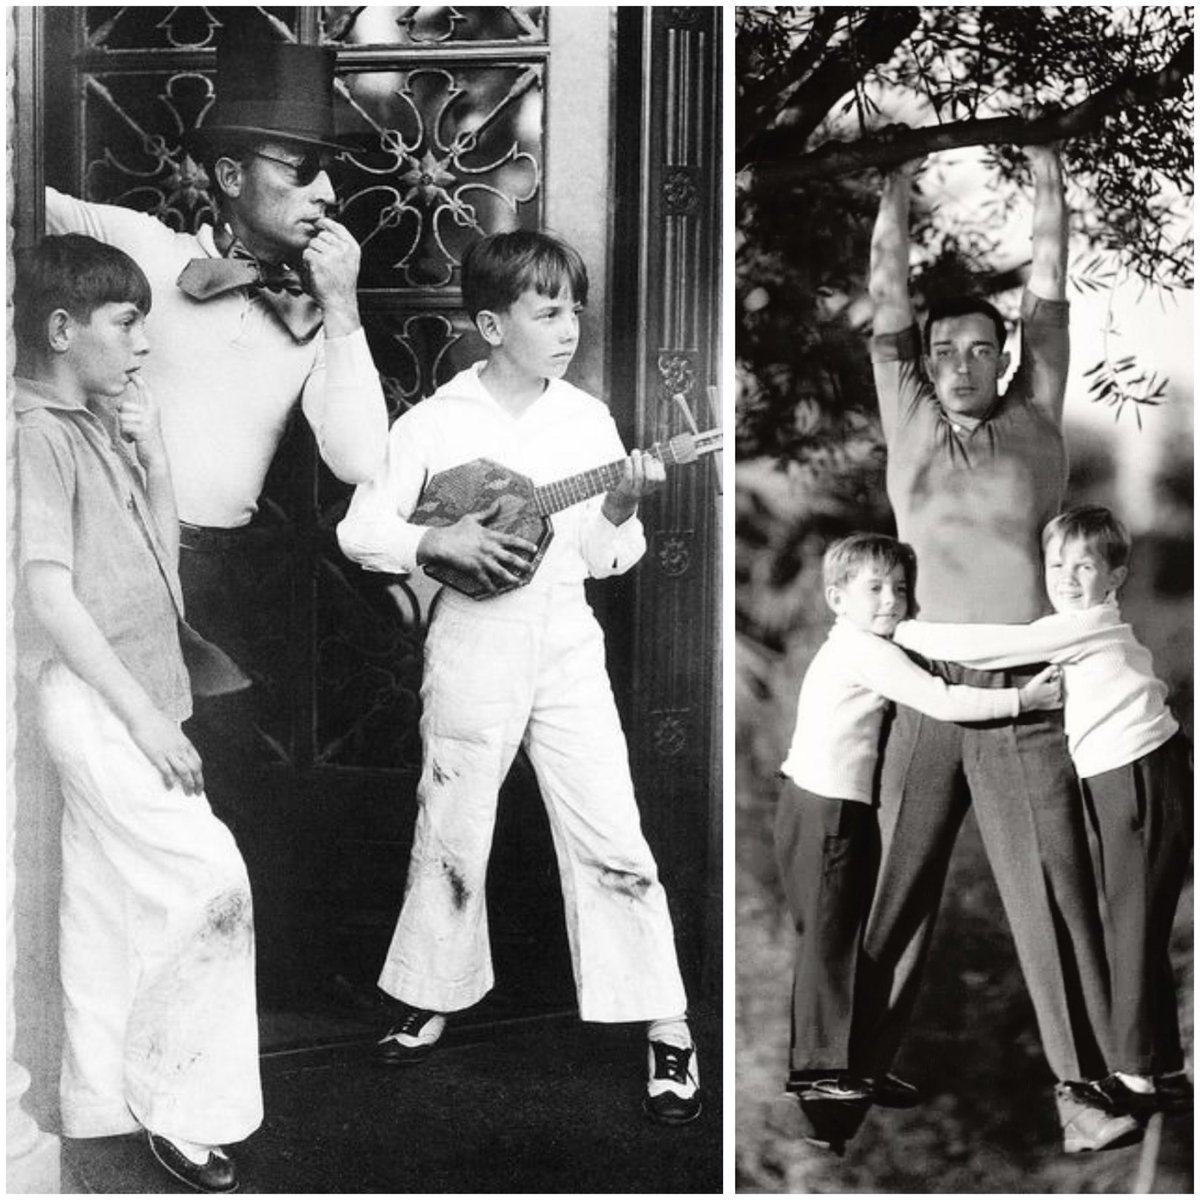 Two great images of Buster and his sons. 
#HappyFathersDay 
#FathersDay
#BusterKeaton
#BusterLove🍀